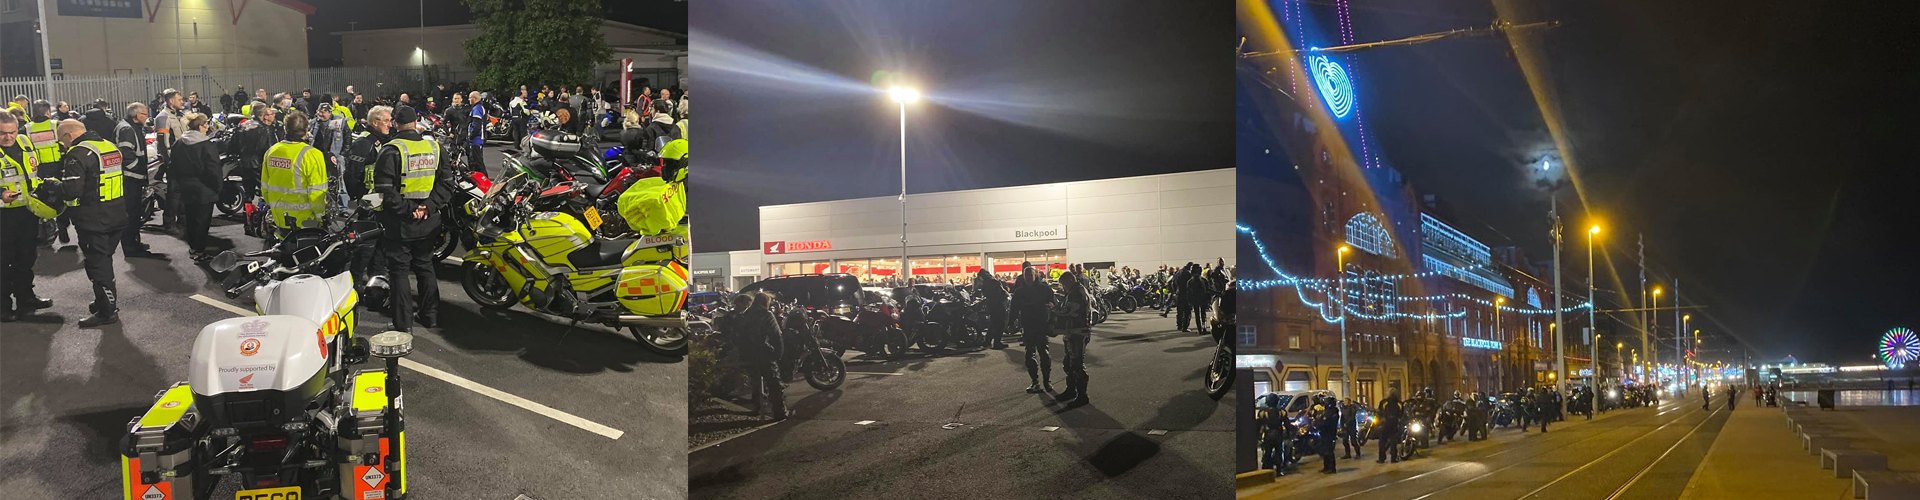 Ride the Lights in aid of North West Blood Bikers